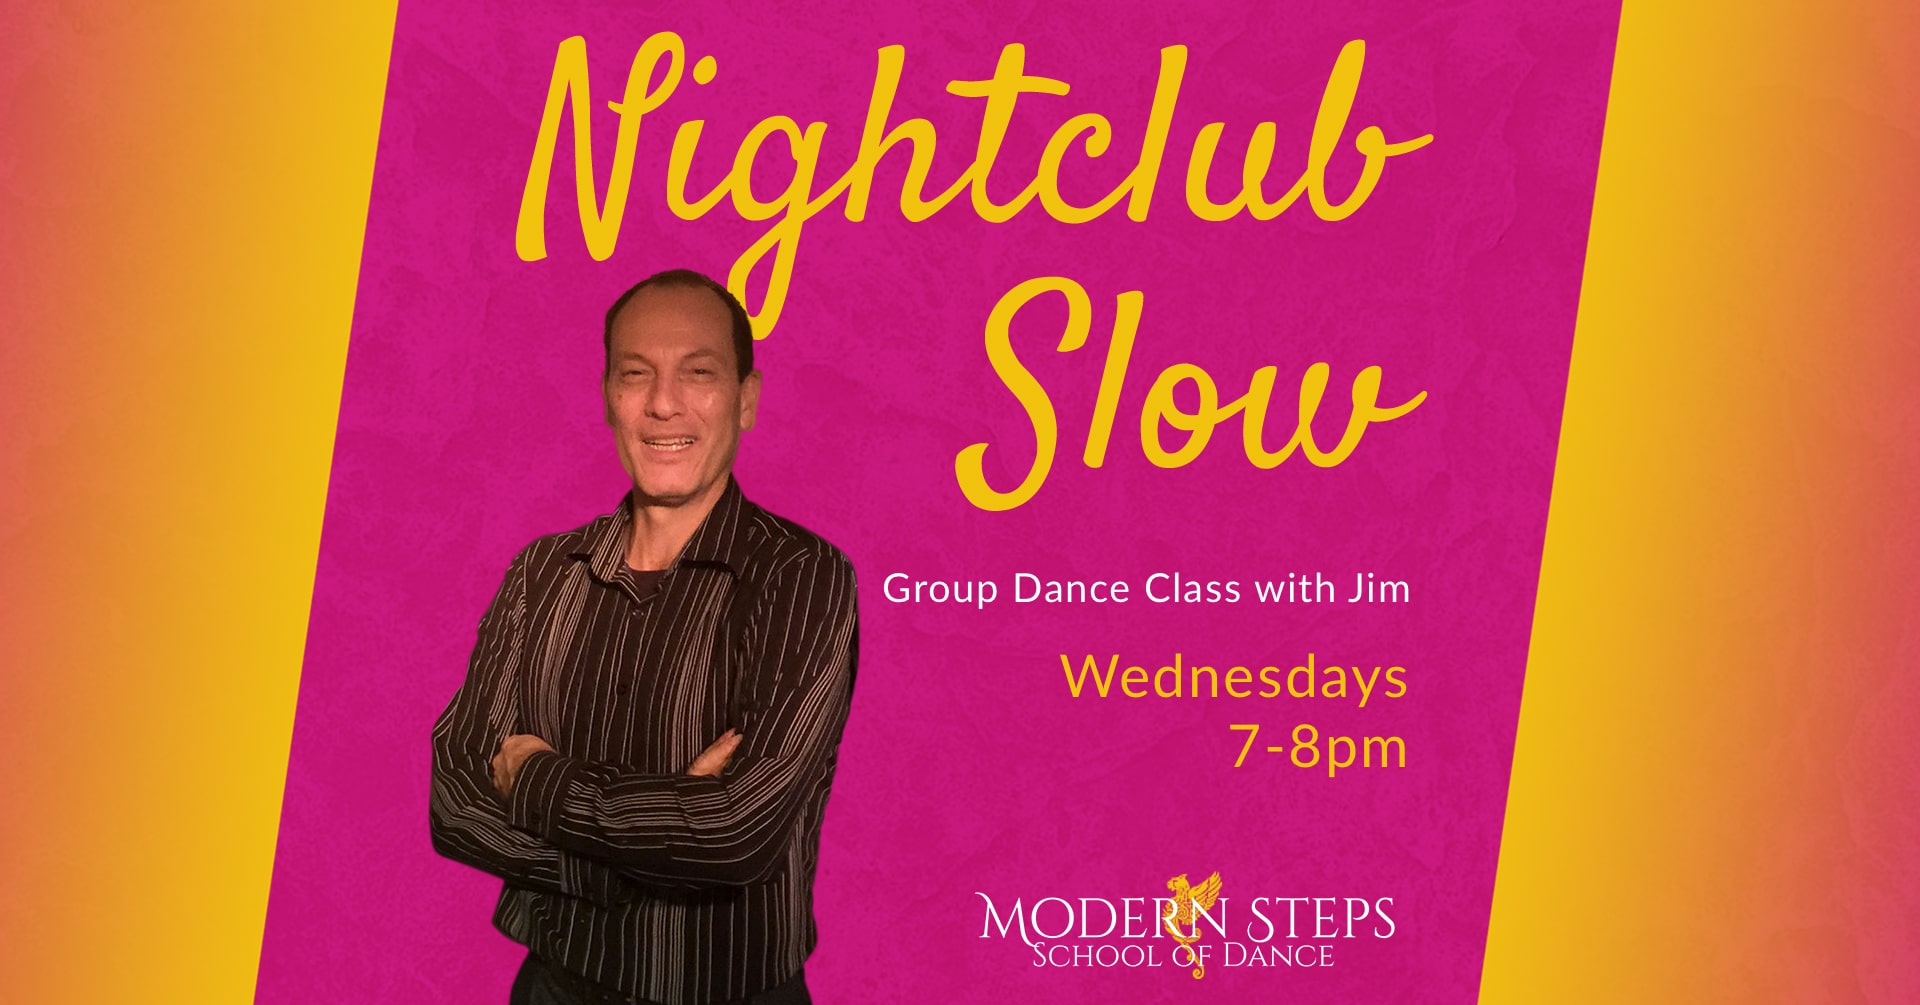 Nightclub Slow group dance classes with Jim at Modern Steps Dance Studio in Naples Florida